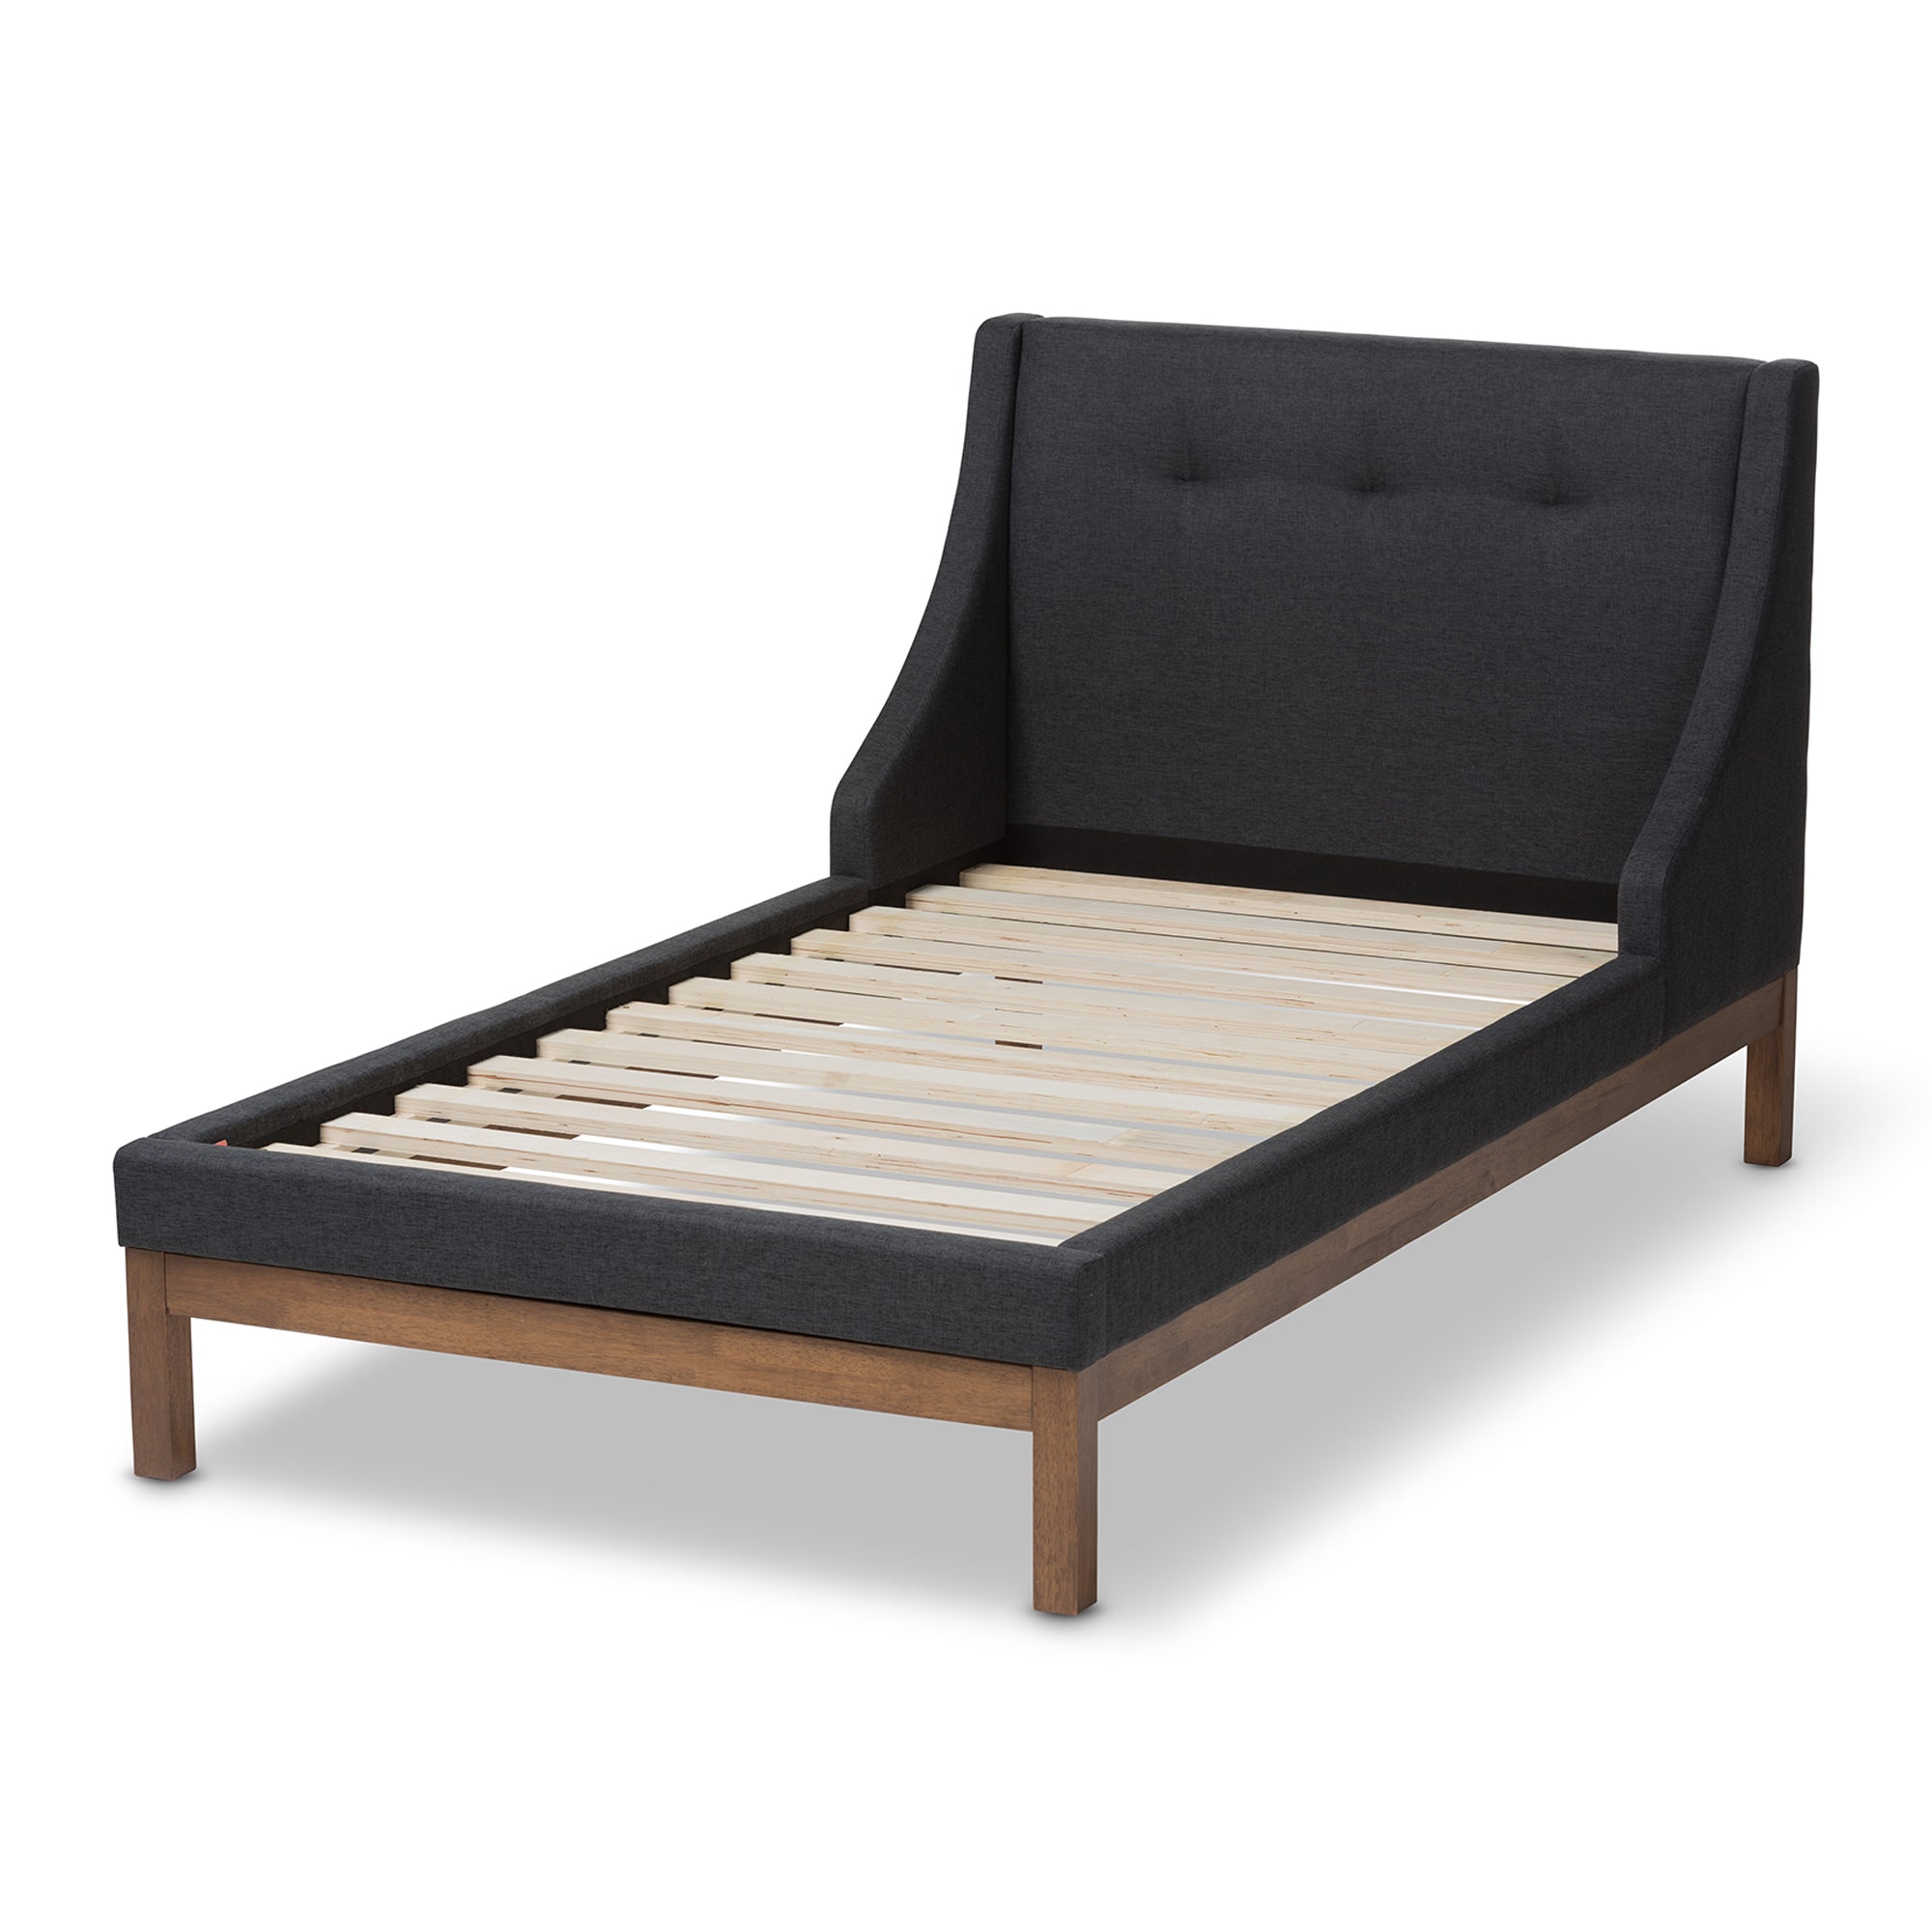 Louvain Contemporary Bed Walnut-Finished-Bed-Baxton Studio - WI-Wall2Wall Furnishings